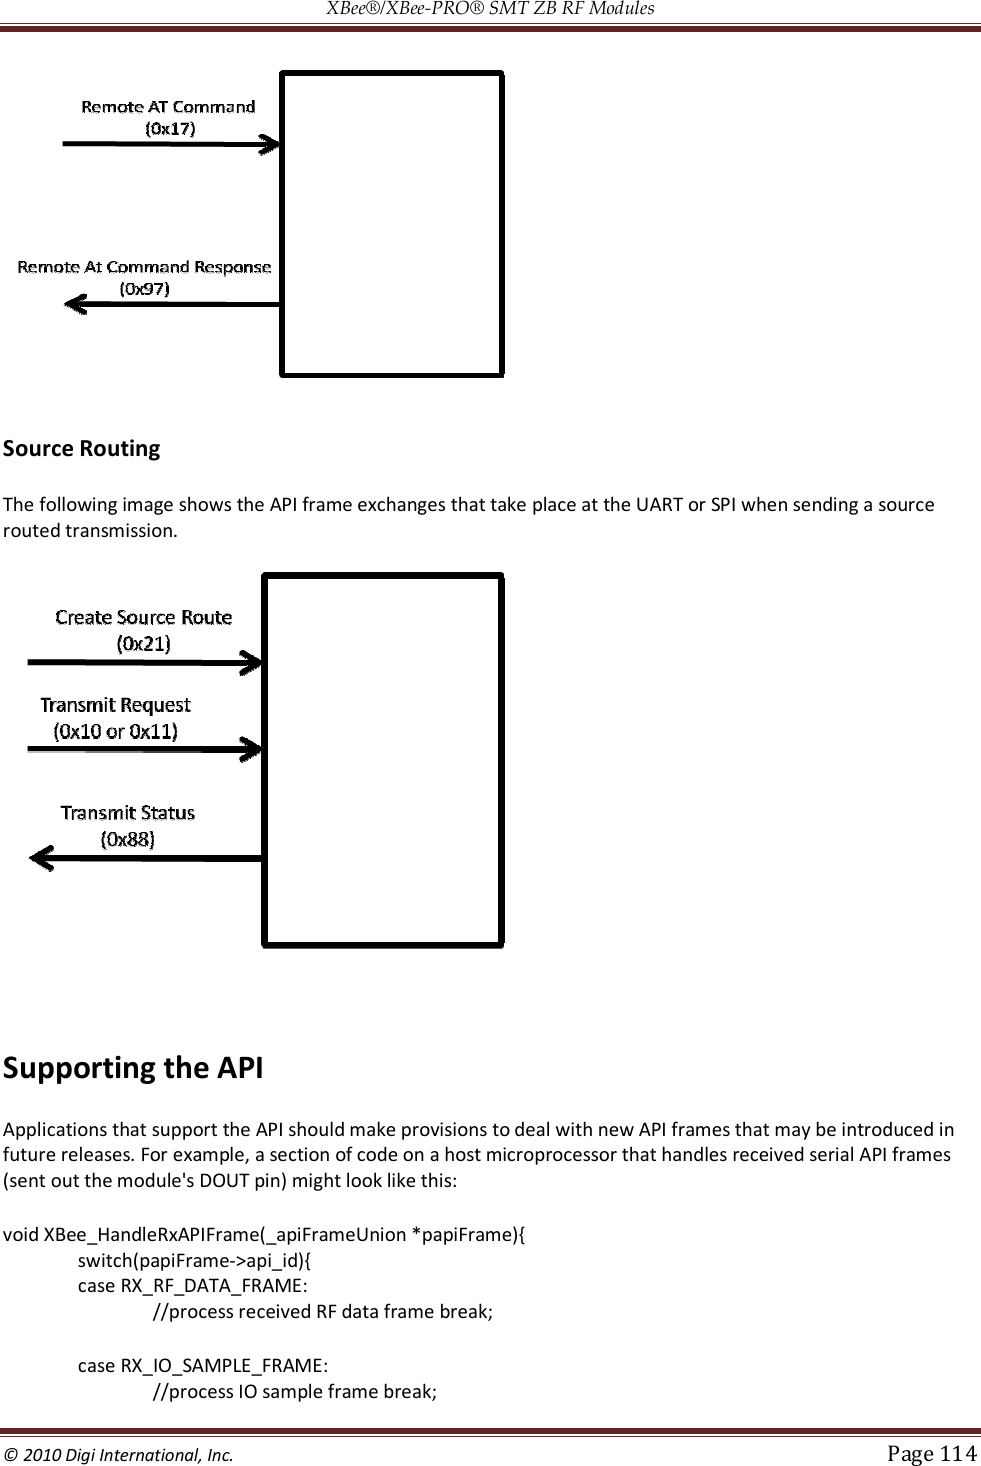 XBee®/XBee‐PRO® SMT ZB RF Modules  © 2010 Digi International, Inc.   Page 114    Source Routing The following image shows the API frame exchanges that take place at the UART or SPI when sending a source routed transmission.   Supporting the API Applications that support the API should make provisions to deal with new API frames that may be introduced in future releases. For example, a section of code on a host microprocessor that handles received serial API frames (sent out the module&apos;s DOUT pin) might look like this: void XBee_HandleRxAPIFrame(_apiFrameUnion *papiFrame){ switch(papiFrame-&gt;api_id){ case RX_RF_DATA_FRAME: //process received RF data frame break; case RX_IO_SAMPLE_FRAME: //process IO sample frame break; 